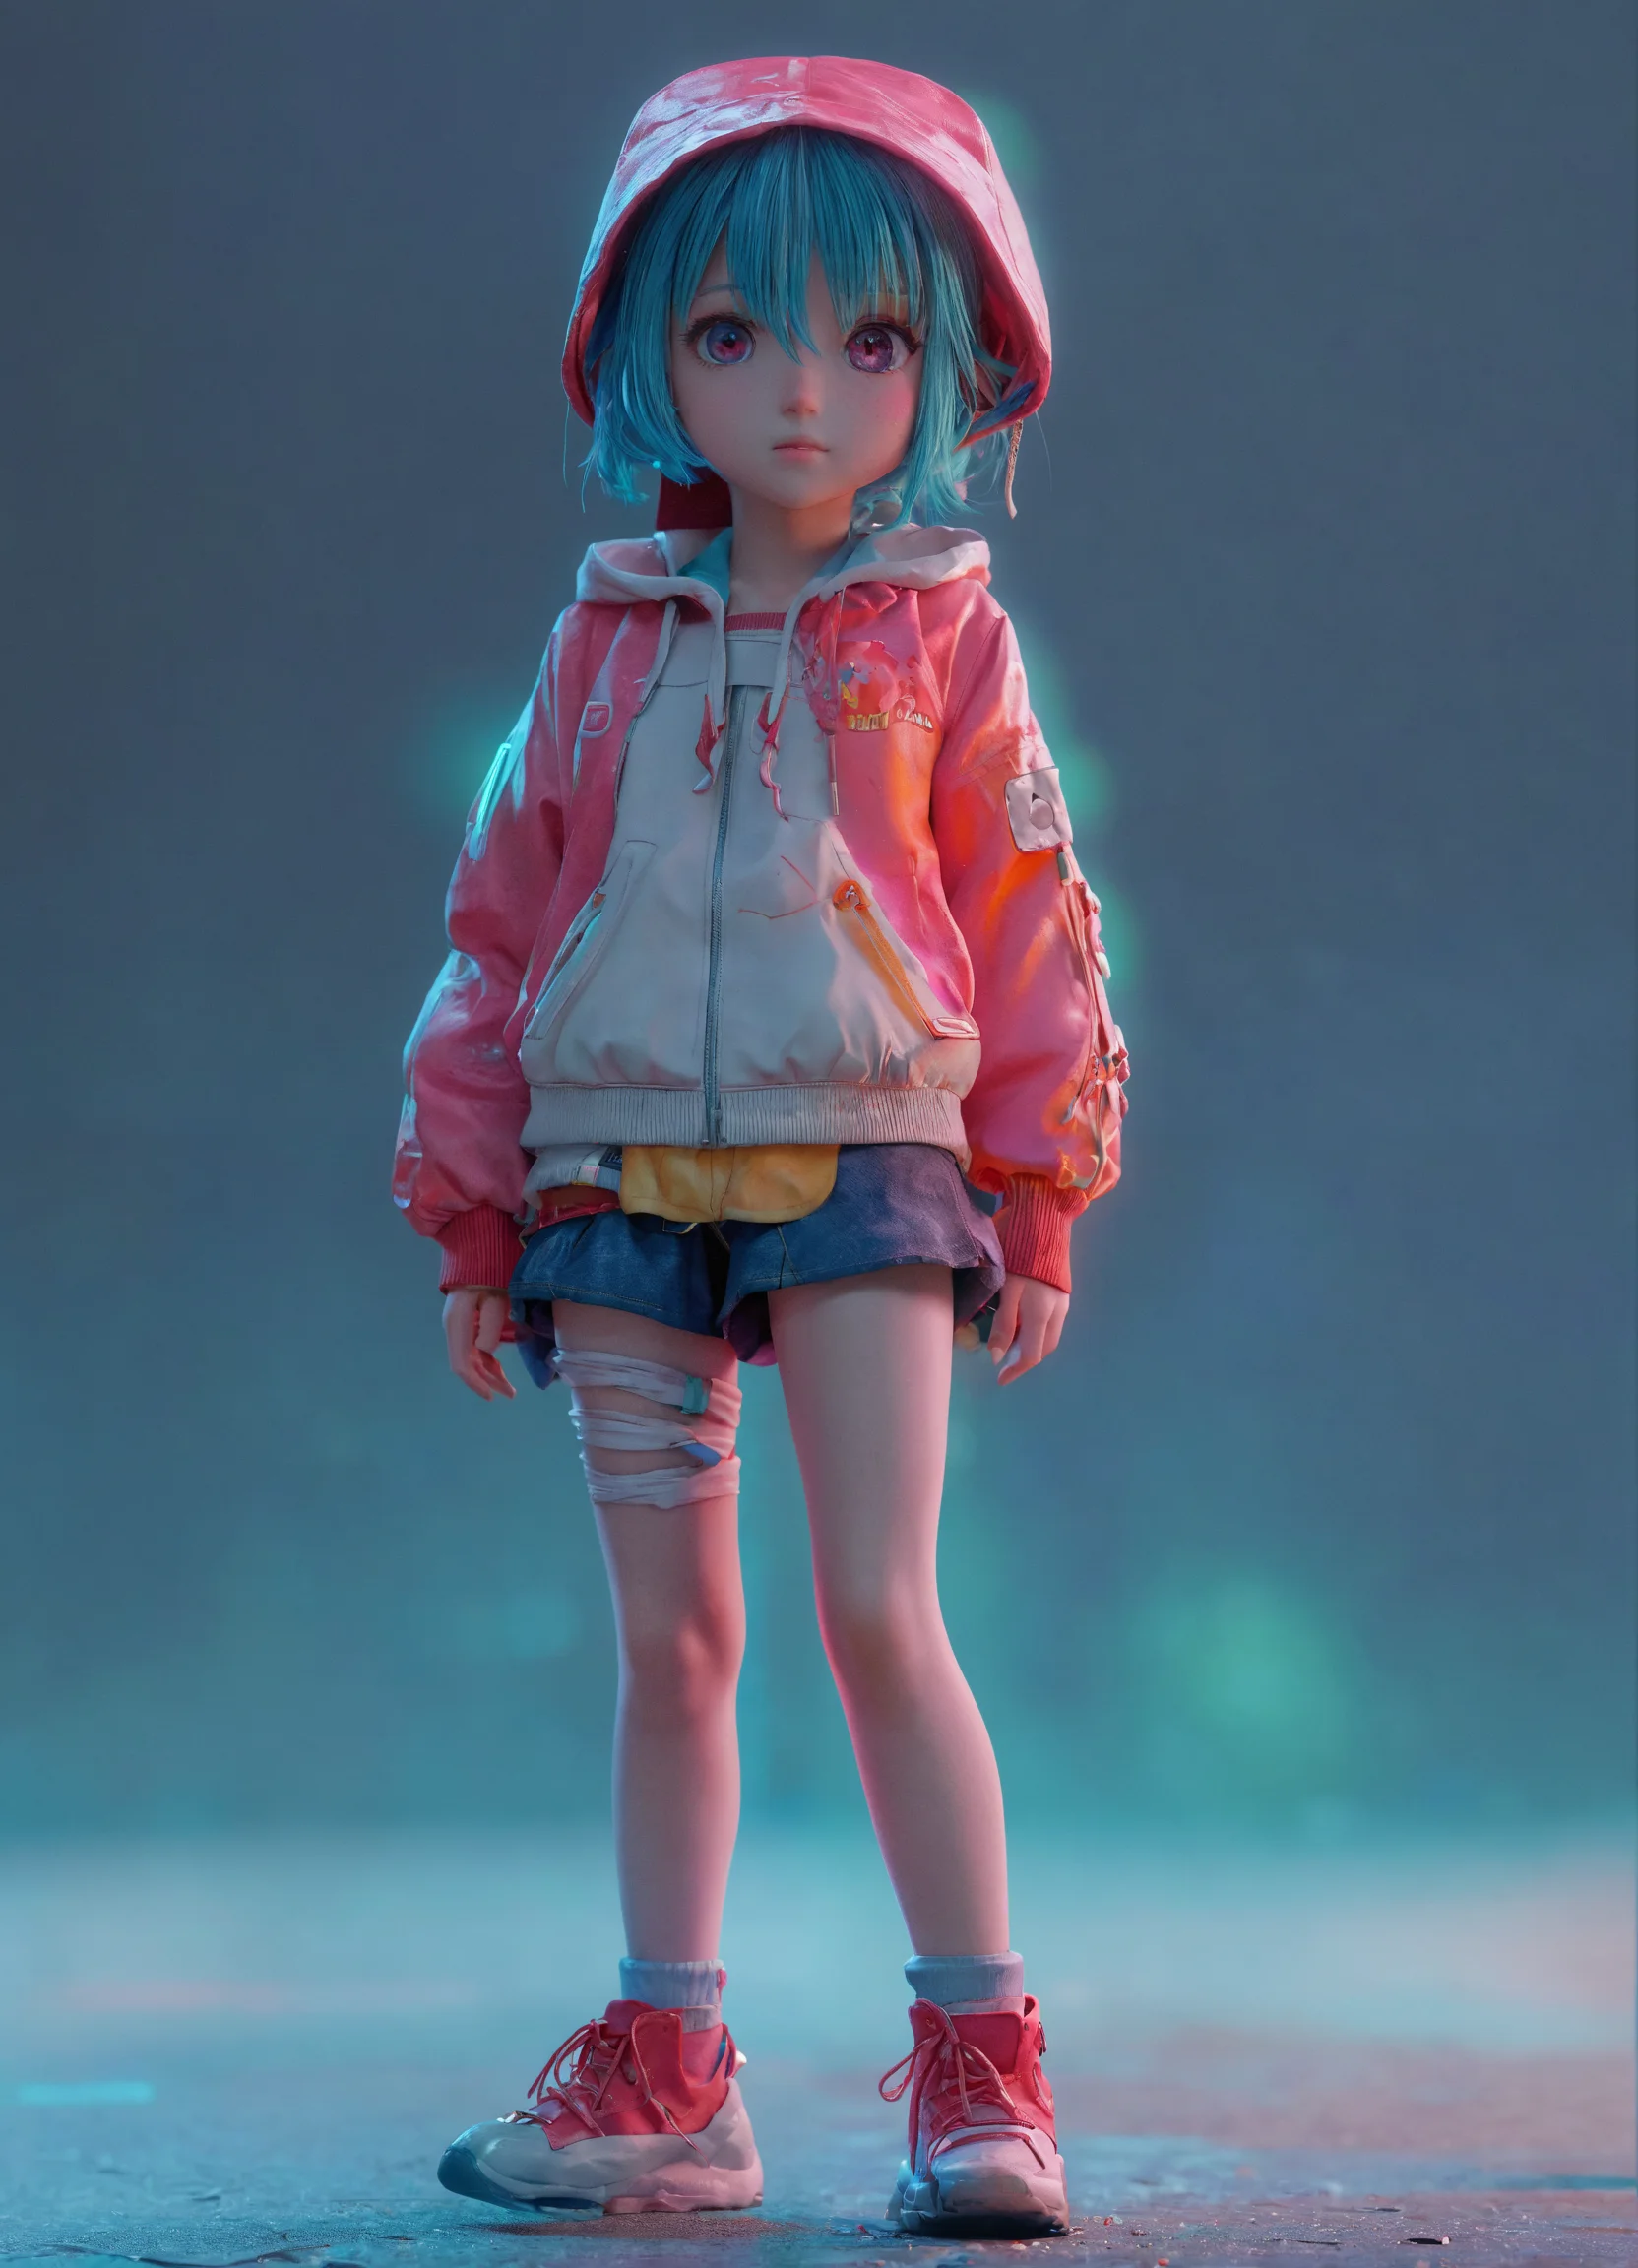 Lexica 4d Photographic Image Of Full Body Image Of A Sweet Tiny Anime Character Realistic